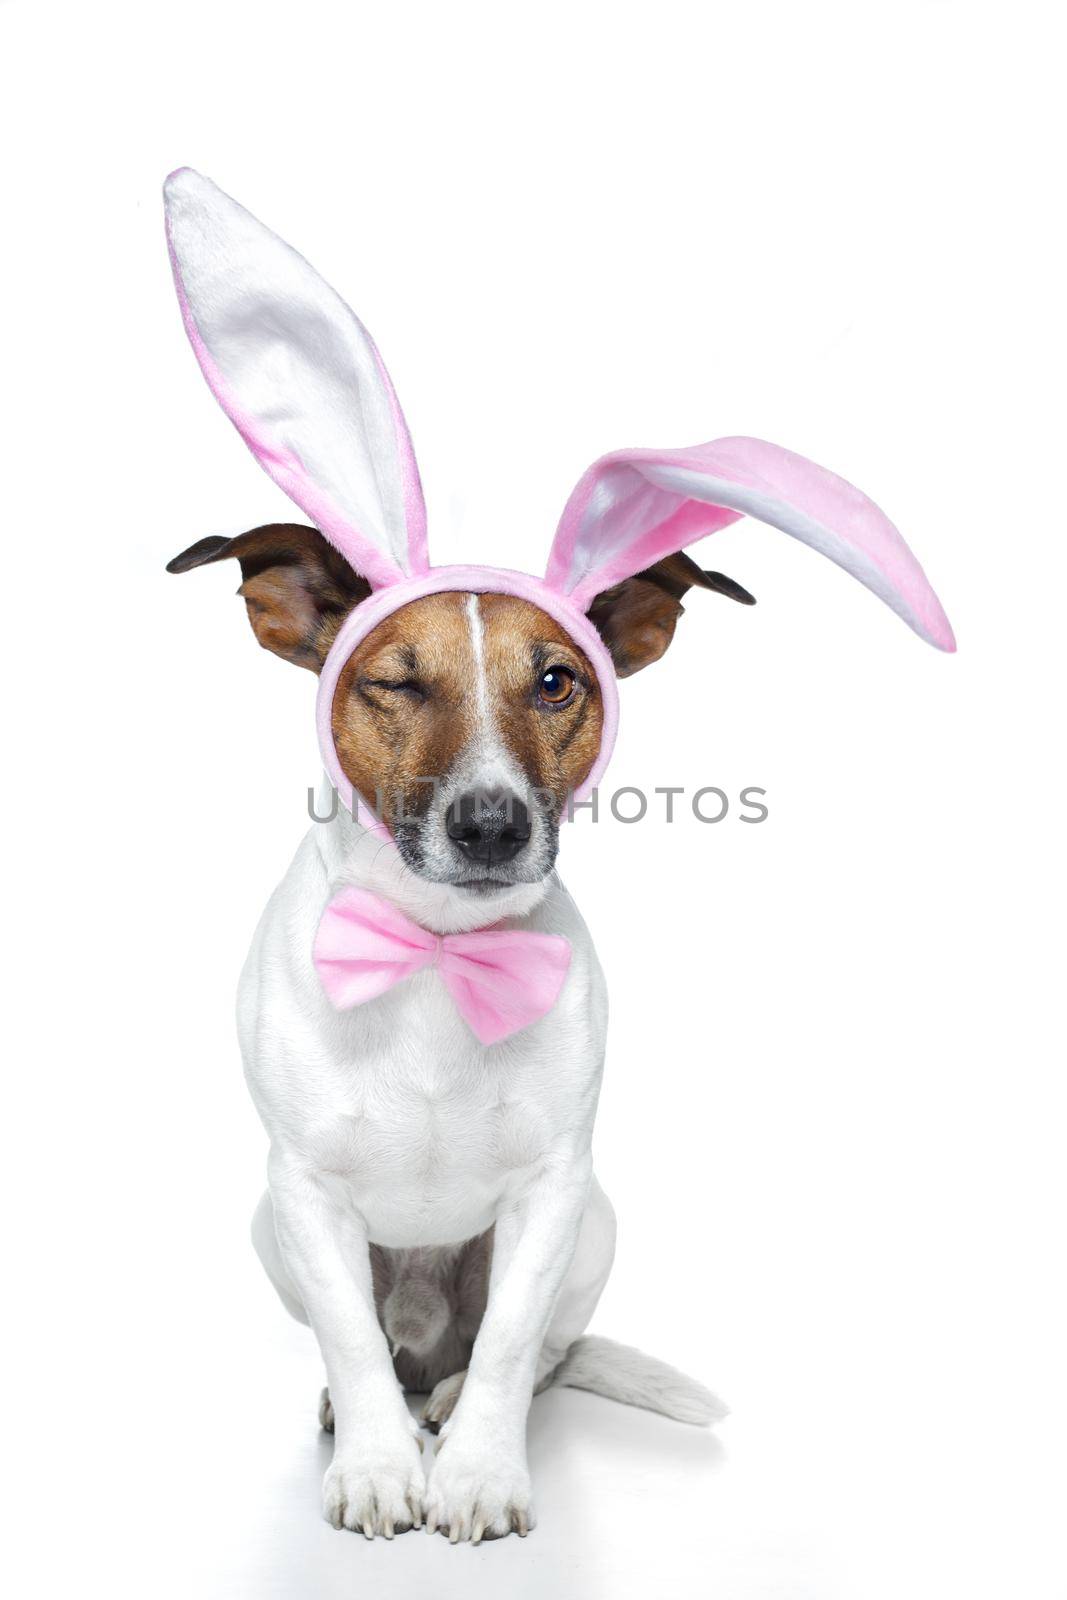 bunny dog easter by Brosch